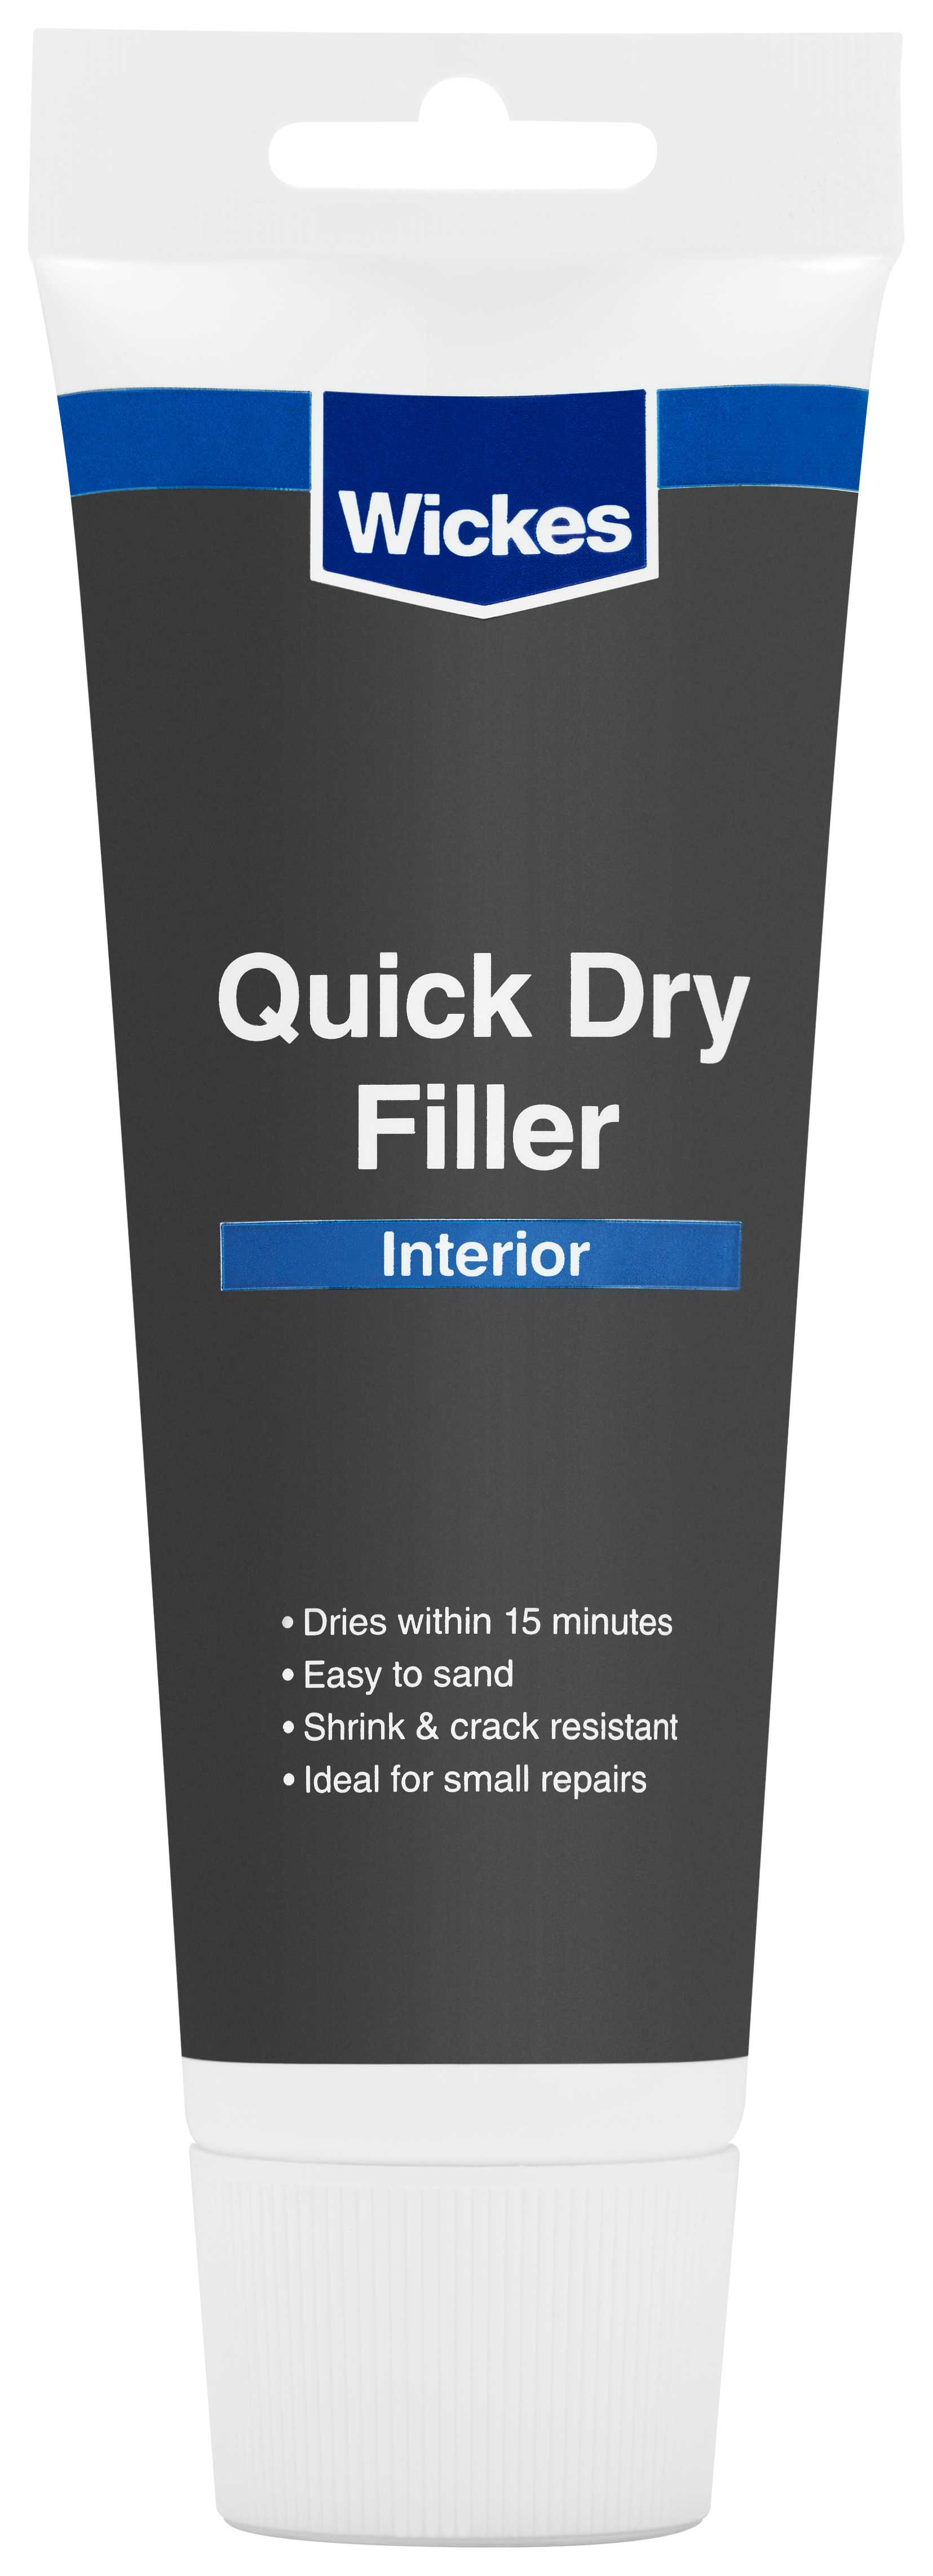 Image of Wickes Quick Drying Filler - 330g